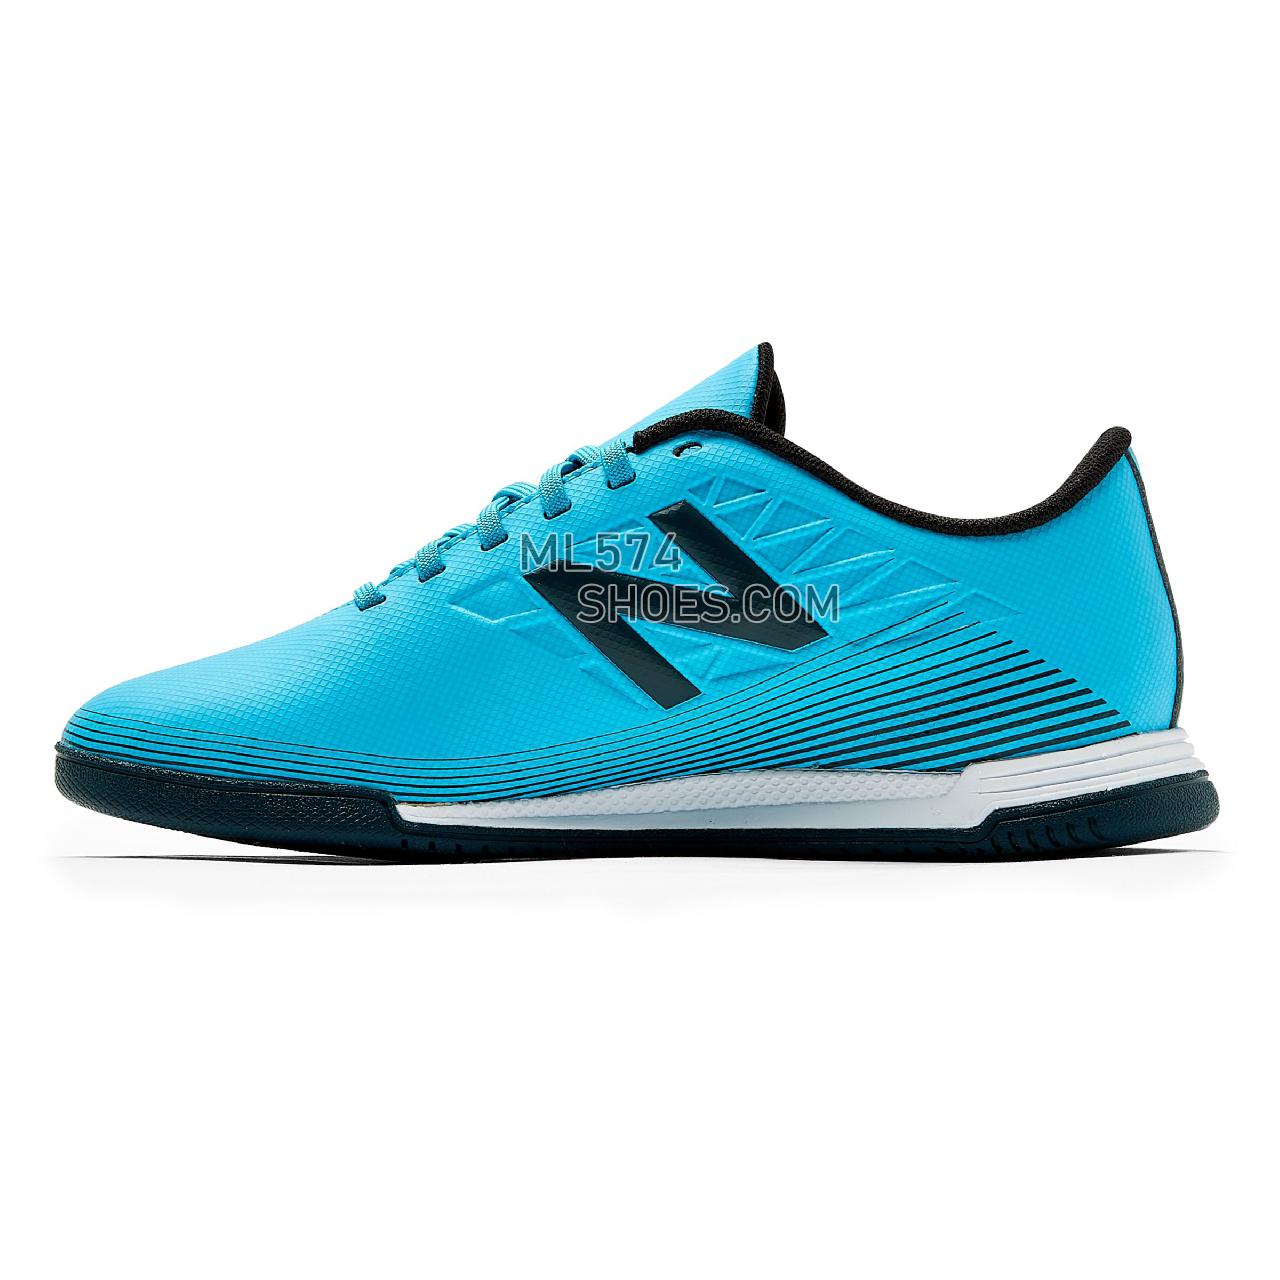 New Balance Furon v5 Dispatch JNR IN - Unisex Men's Women's Indoor FootBall Boots - Bayside with Supercell - JSFDIBS5